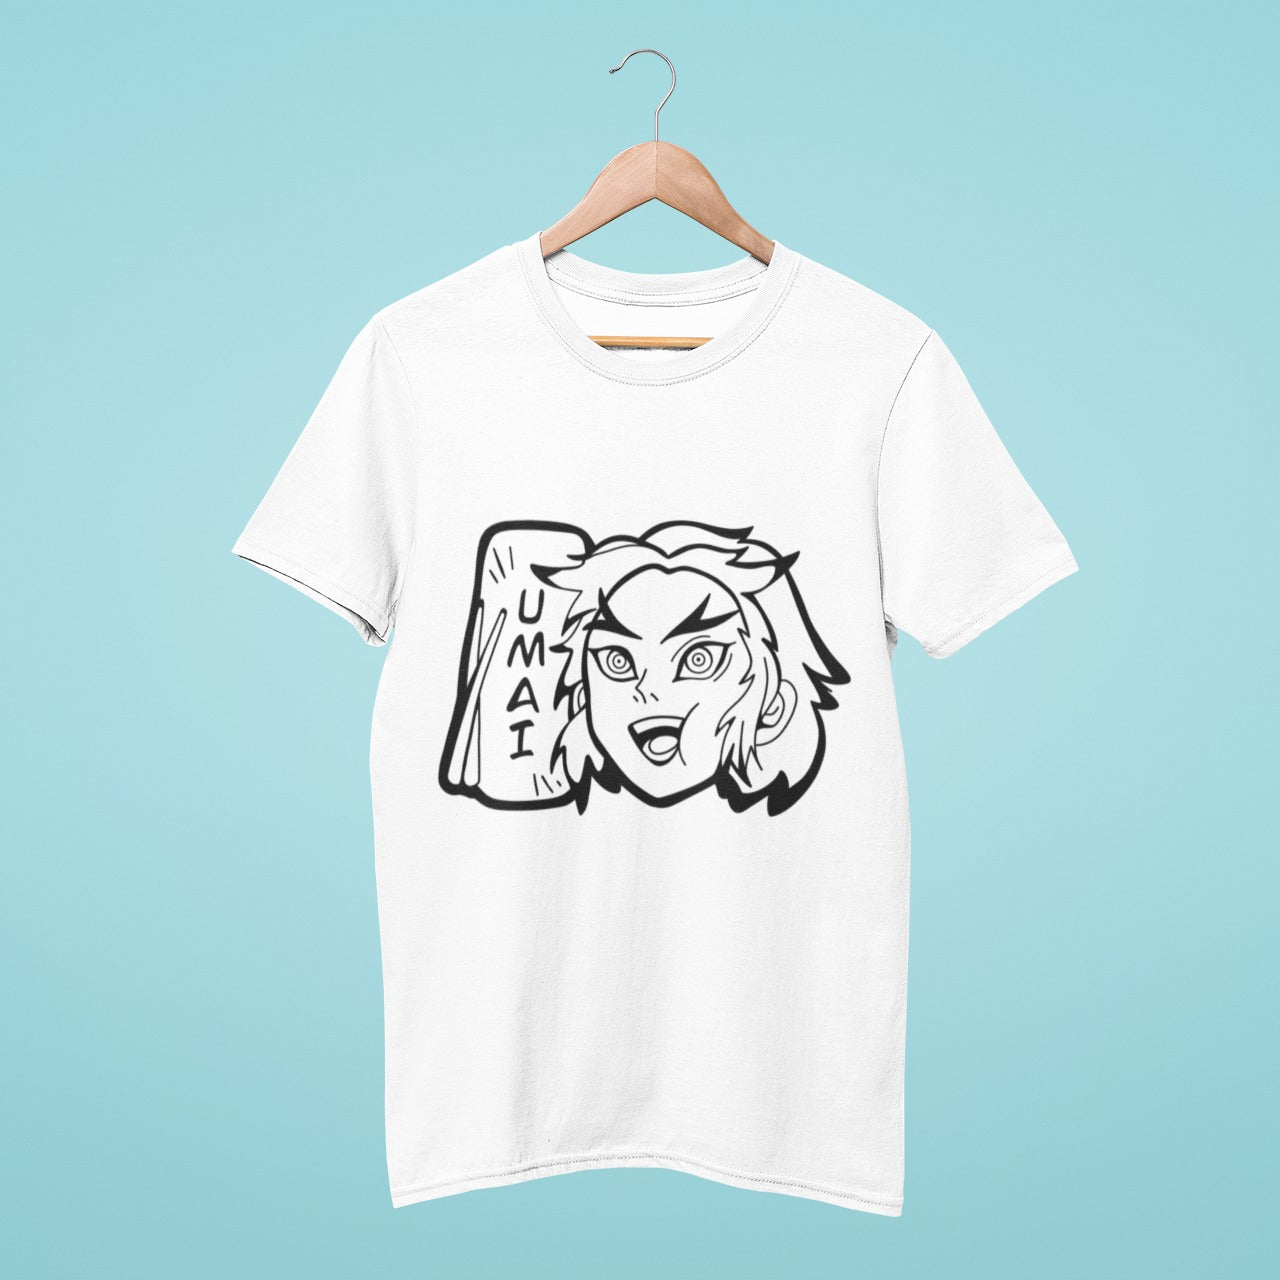 Add some joy to your wardrobe with our delightful white t-shirt featuring a charming black and white image of Rengoku from Demon Slayer, with a happy expression on his face and the word "umai" (meaning "delicious" in Japanese) as he's shown eating. Made with high-quality materials, this shirt offers both comfort and style. Perfect for anime conventions and casual outings, get yours today and showcase your love for the popular anime series!